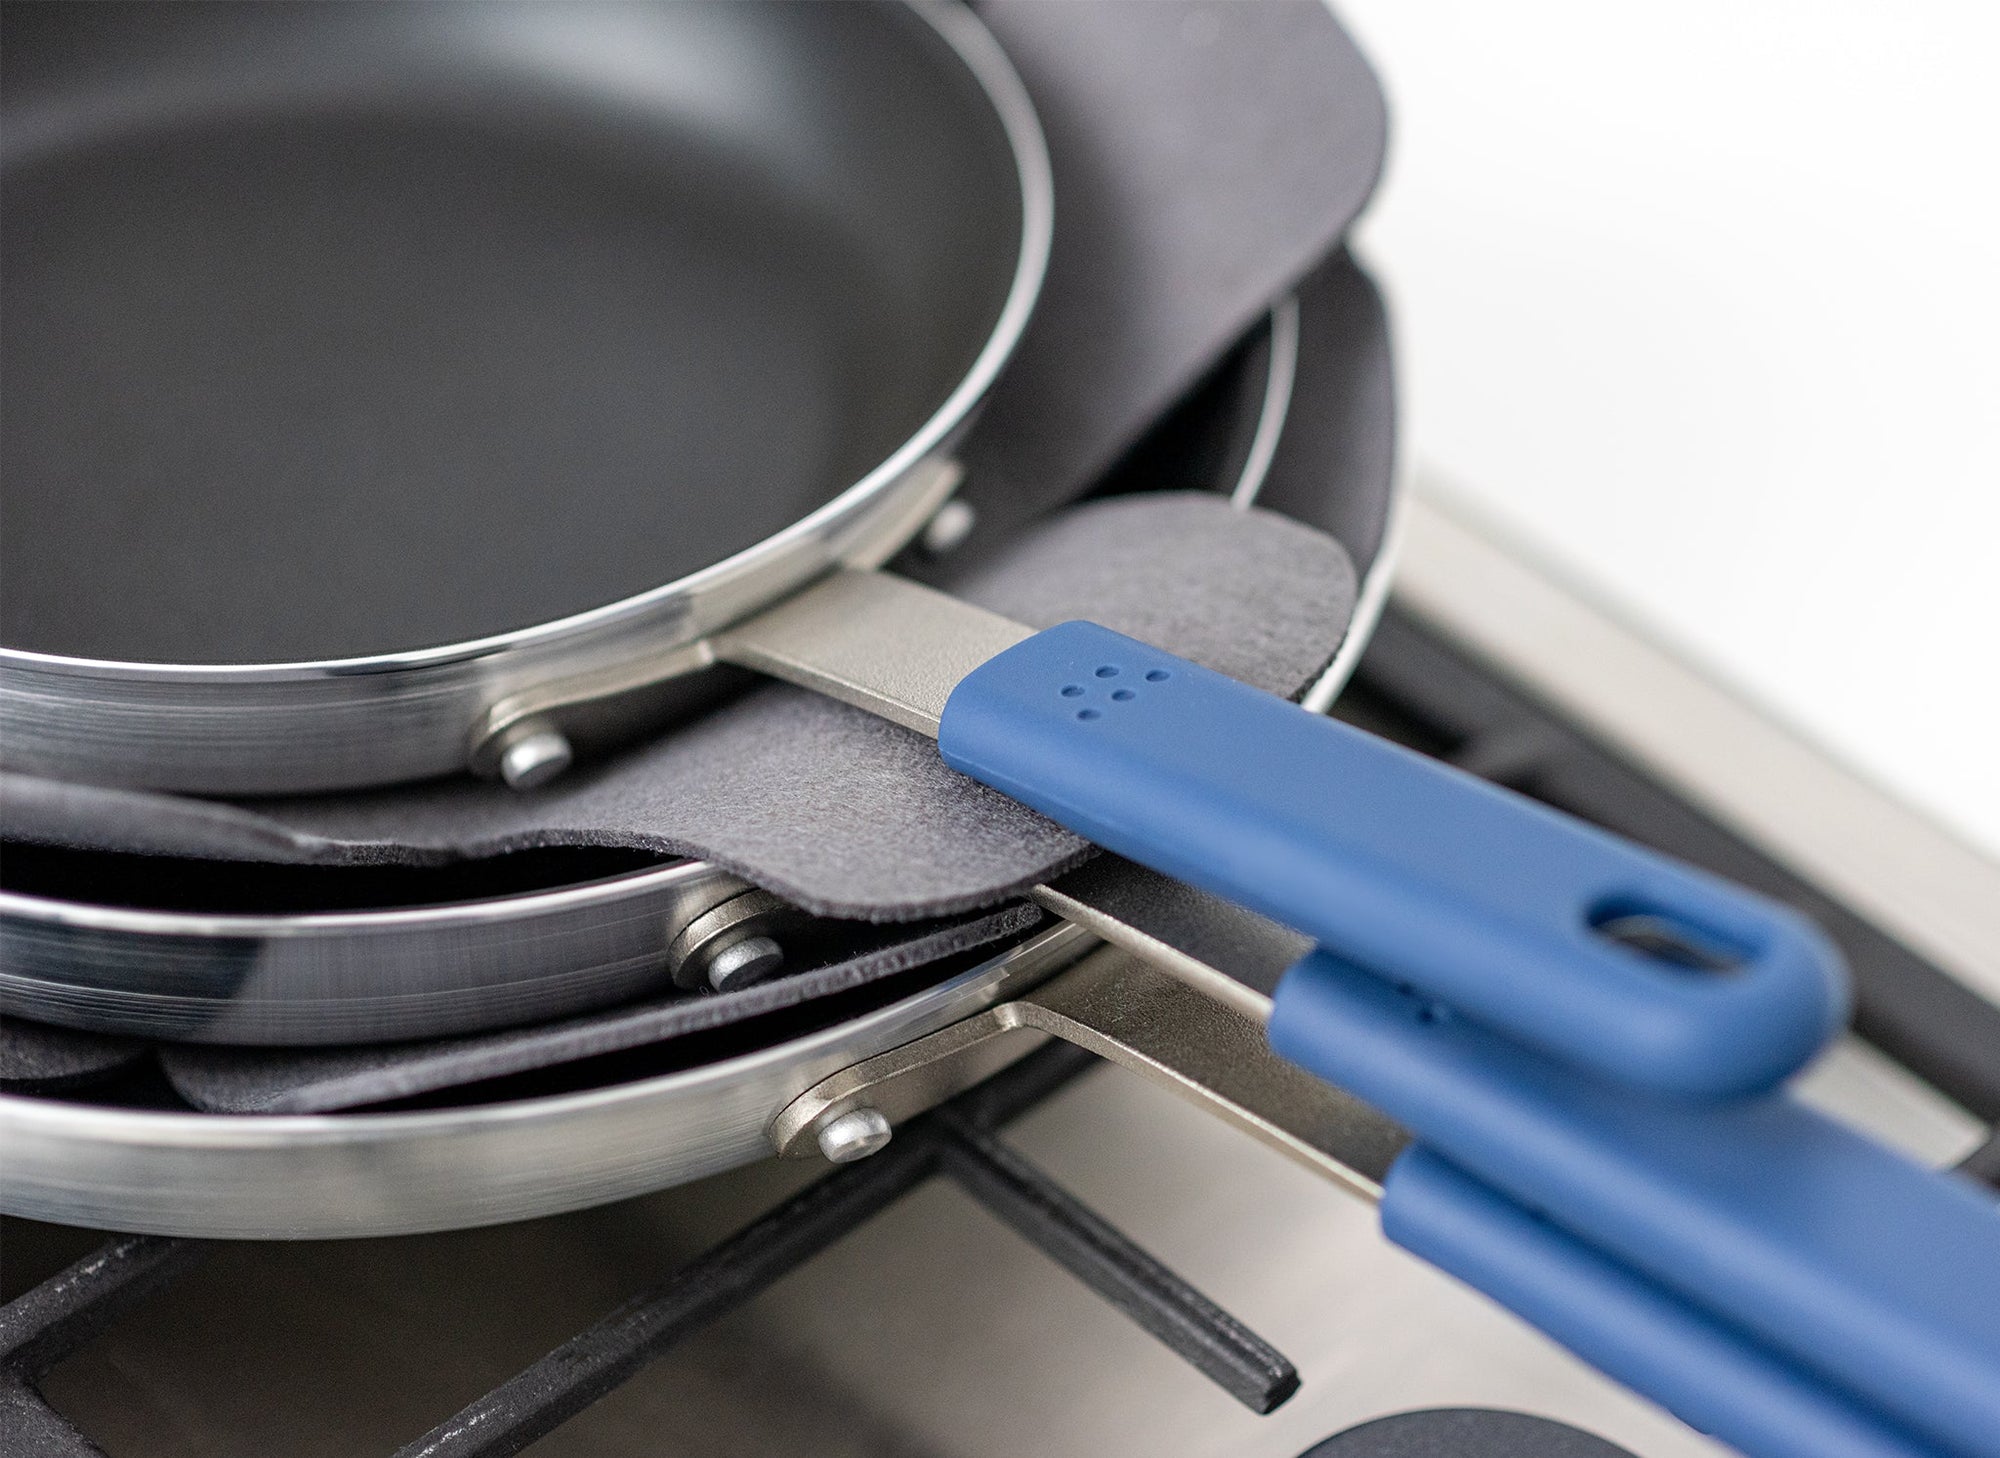 {{1-pack,2-pack}} Stack of three Misen Nonstick Pans on a stovetop with two grey felt pan protectors visible between them.